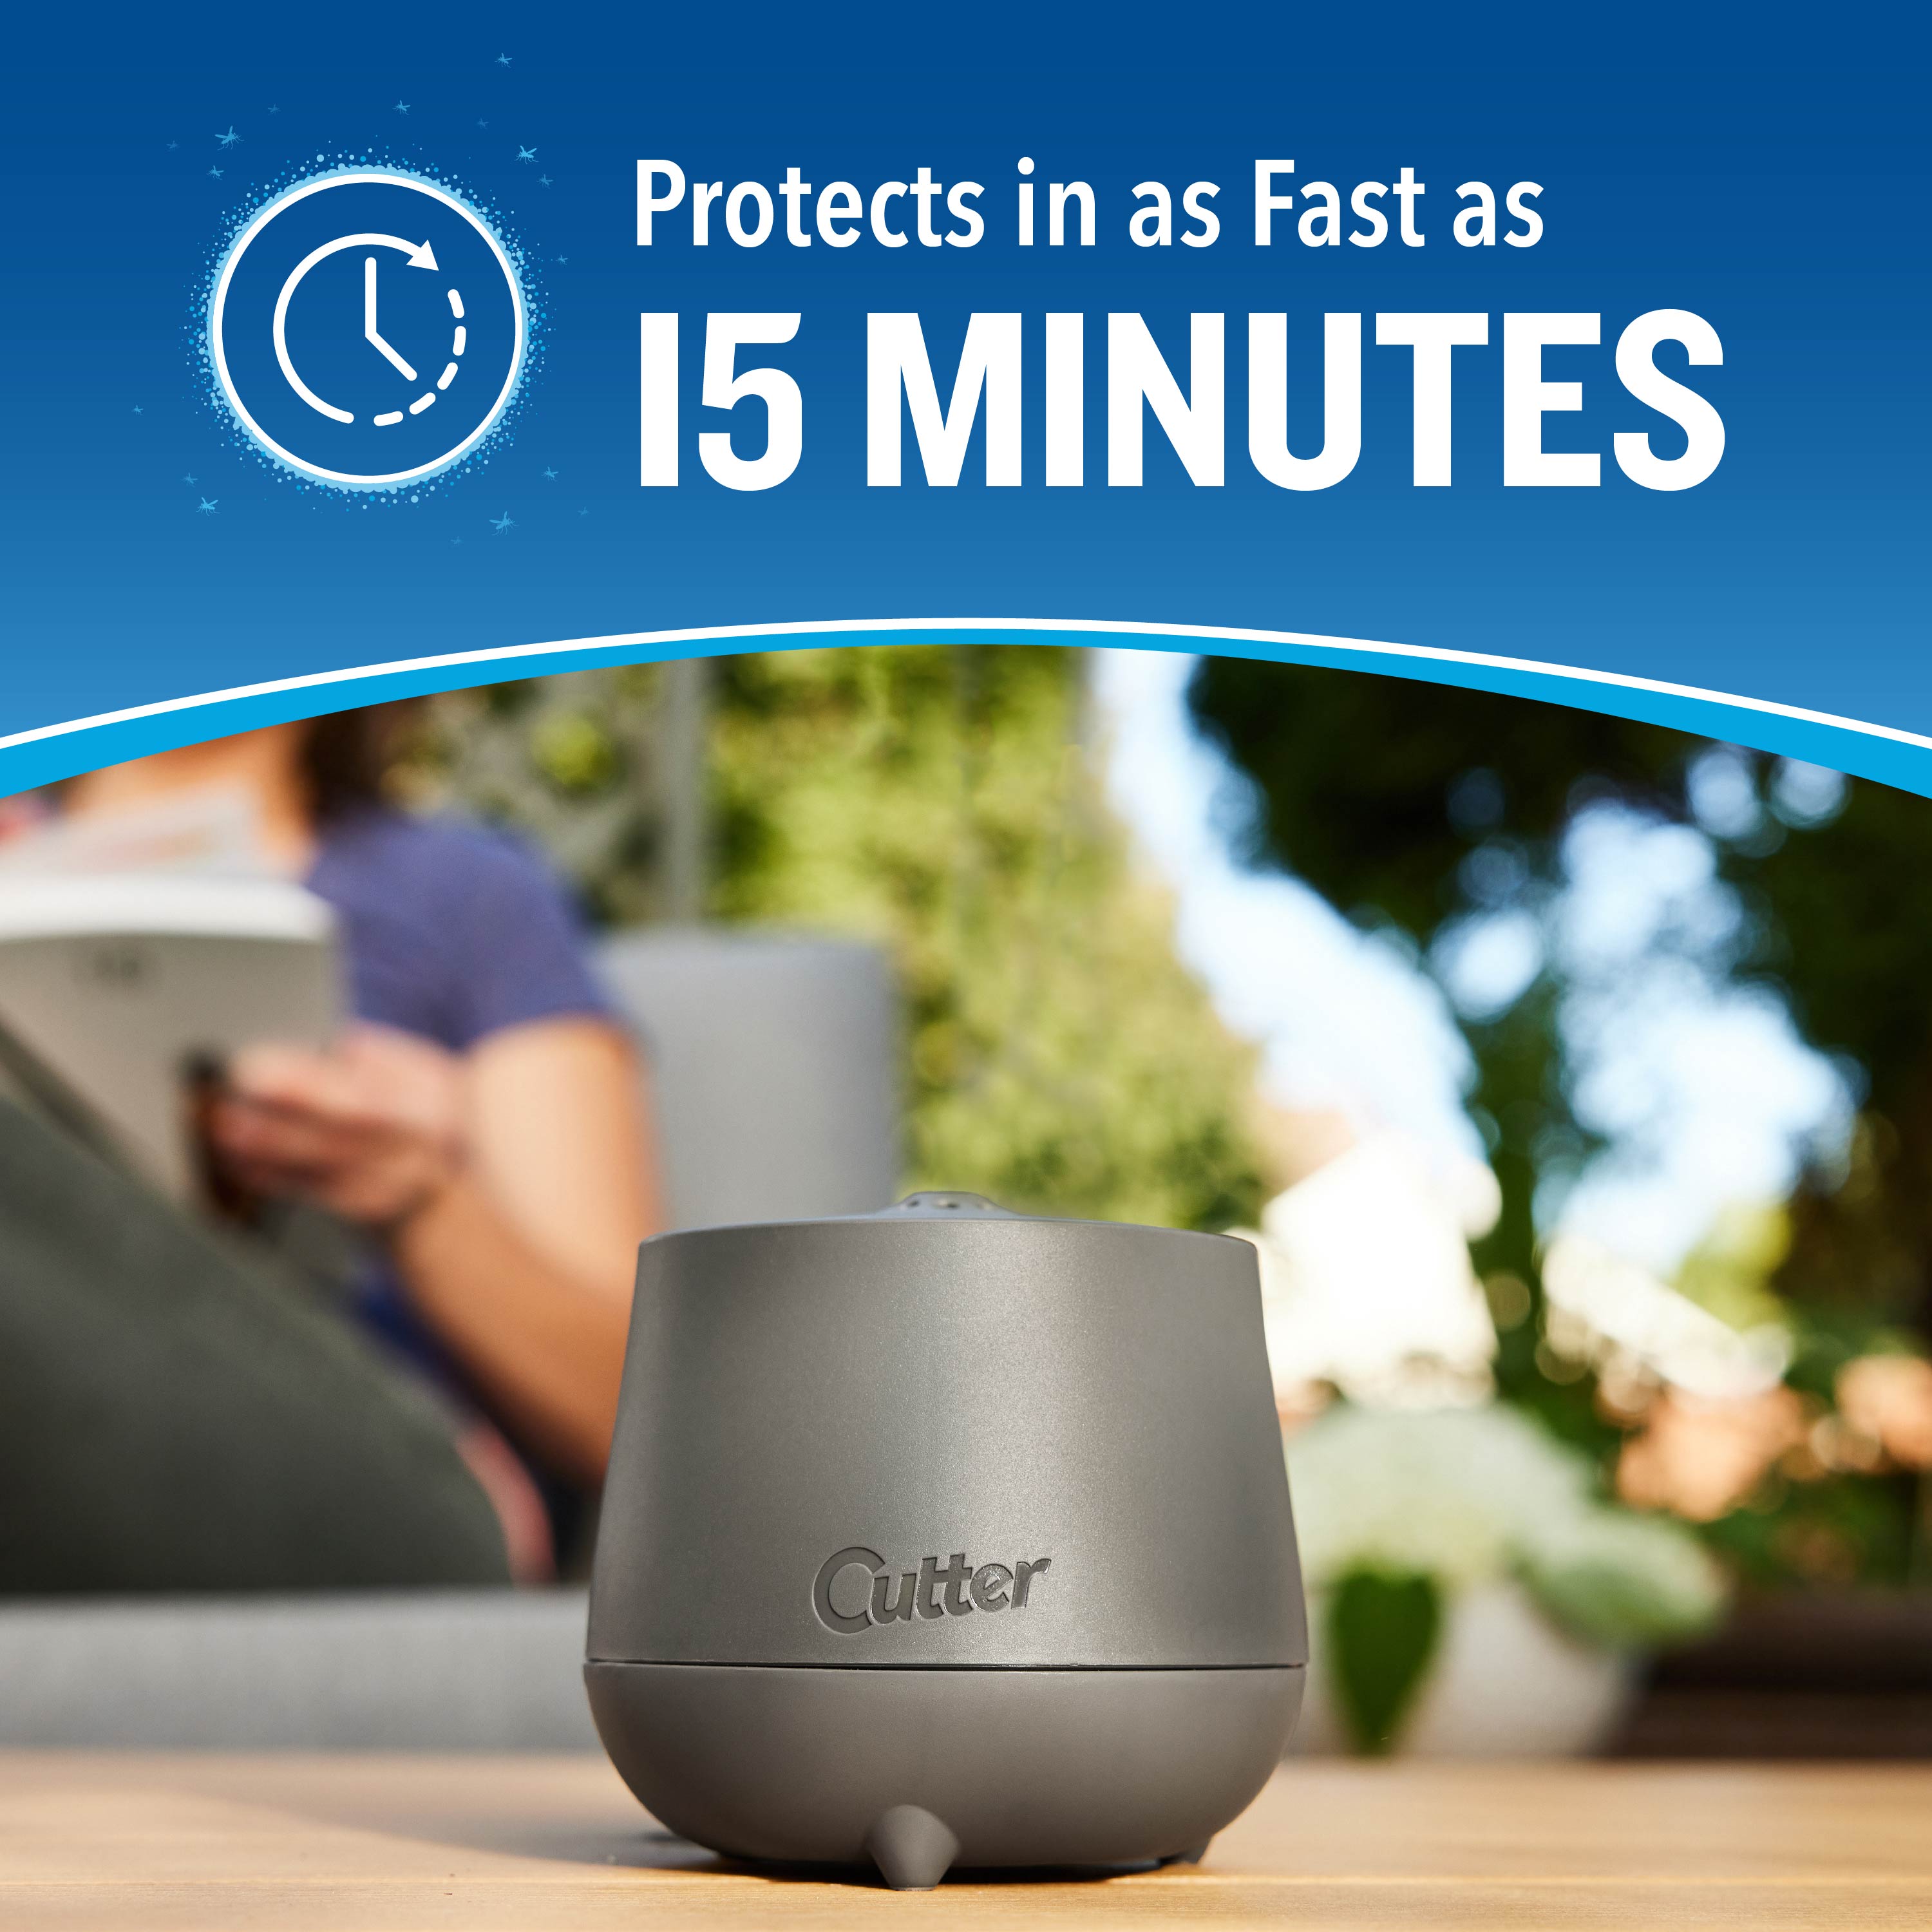 Eclipse™ Zone Mosquito Repellent Outdoor Device - Protects in as Fast as 15 Minutes